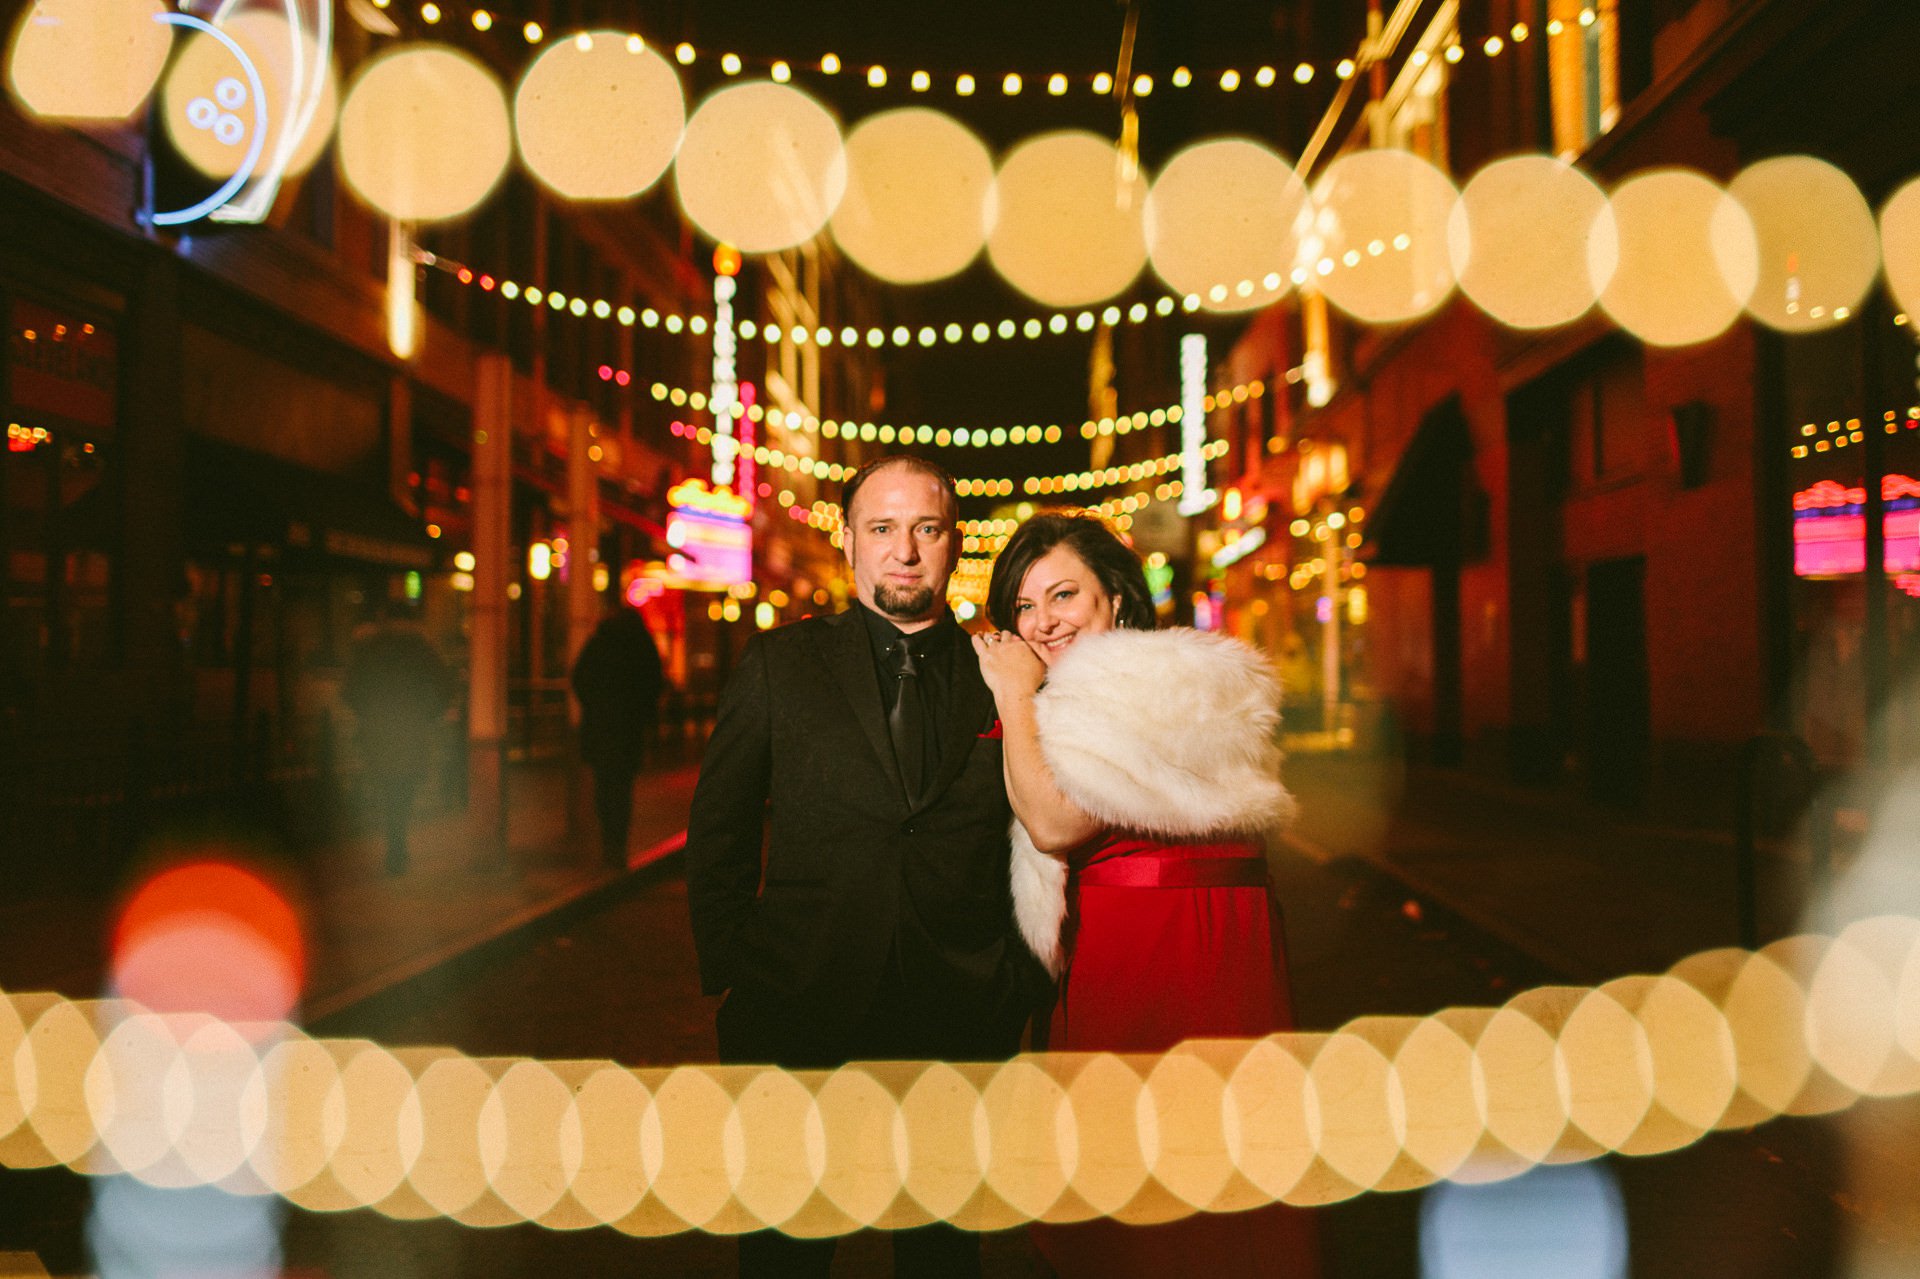 House of Blues Wedding Photographer in Downtown Cleveland 2 46.jpg